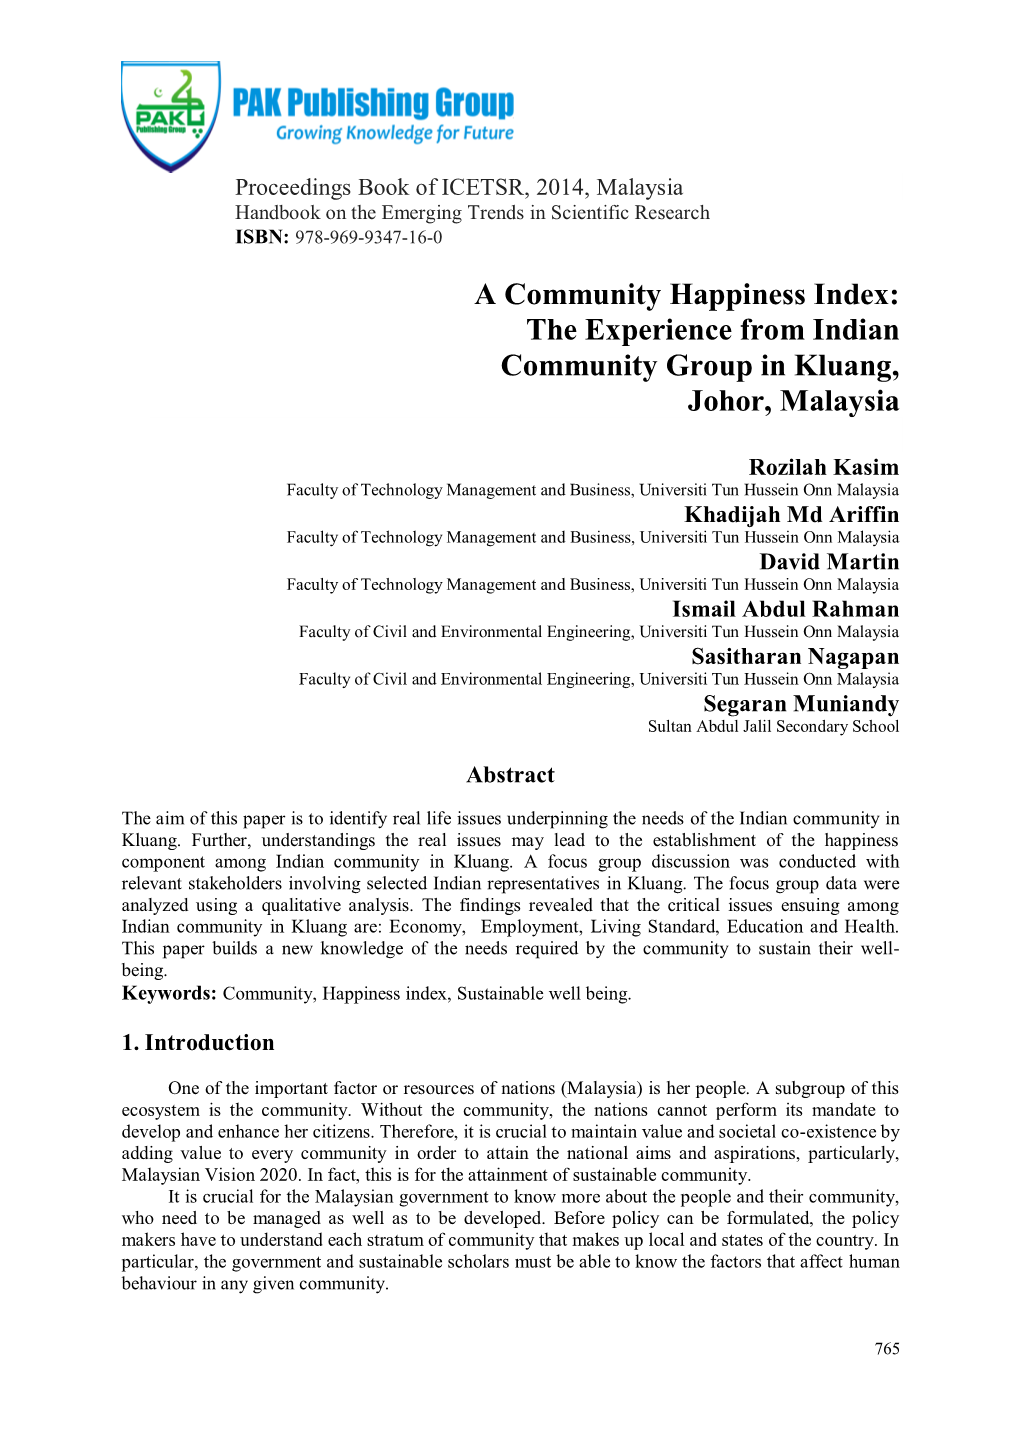 A Community Happiness Index: the Experience from Indian Community Group in Kluang, Johor, Malaysia